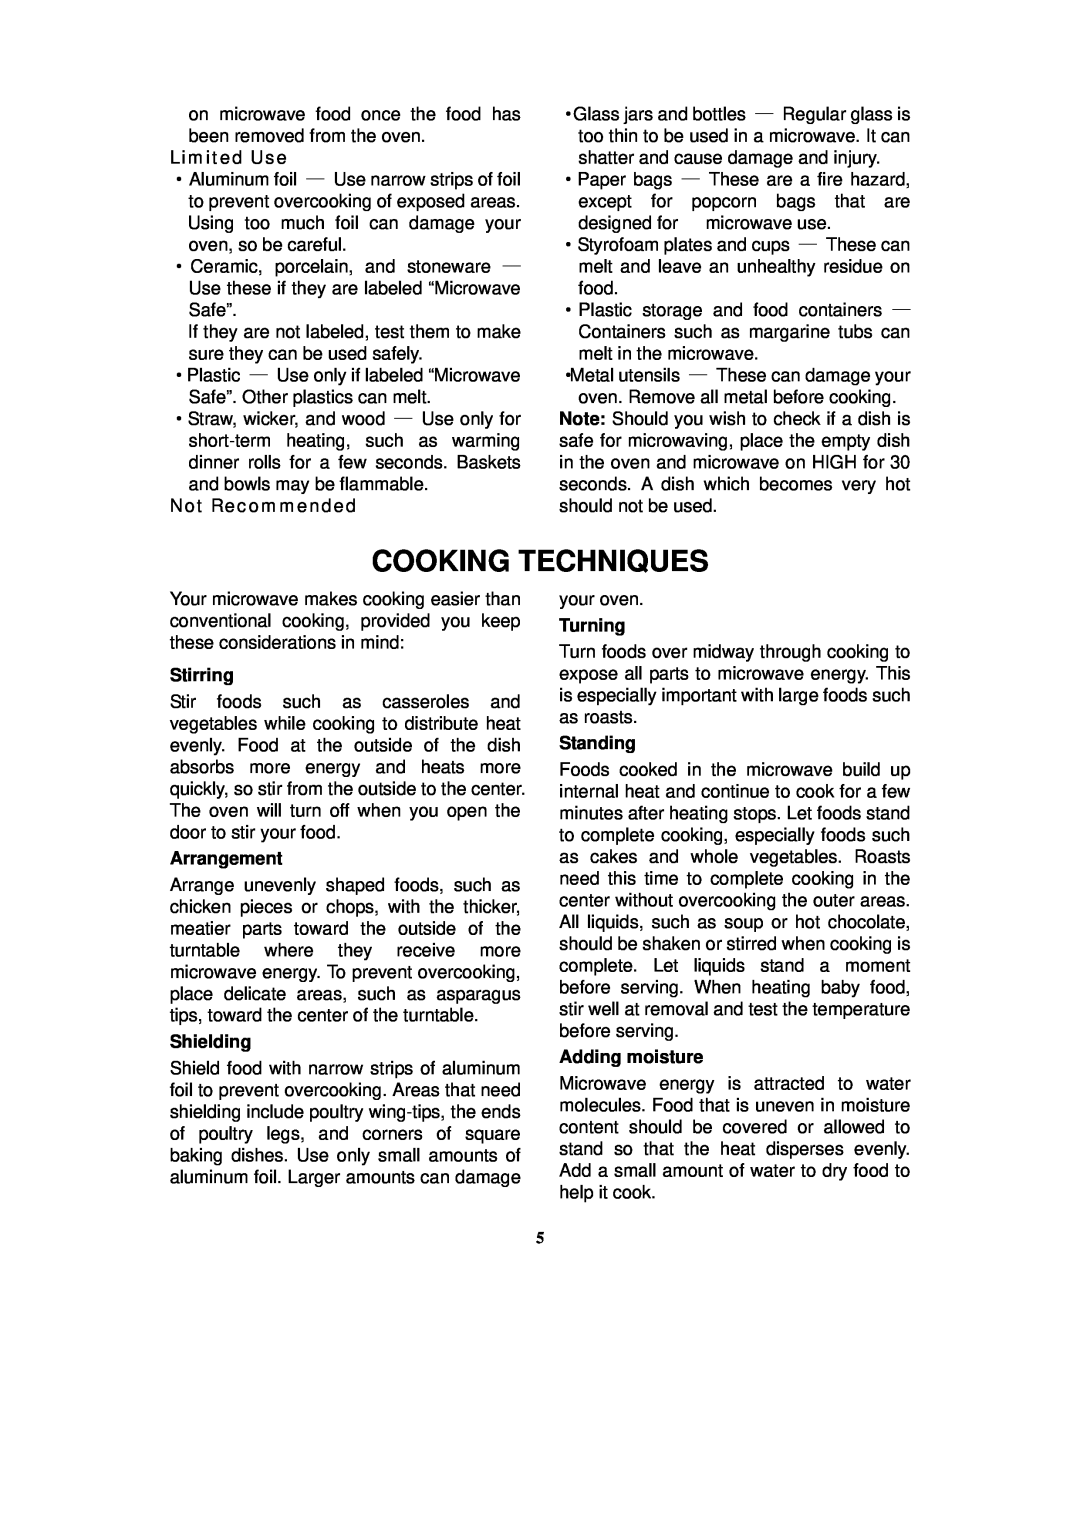 RCA RMW741 warranty Cooking Techniques, Limited Use, Not Recommended, Stirring, Arrangement, Shielding, Turning, Standing 